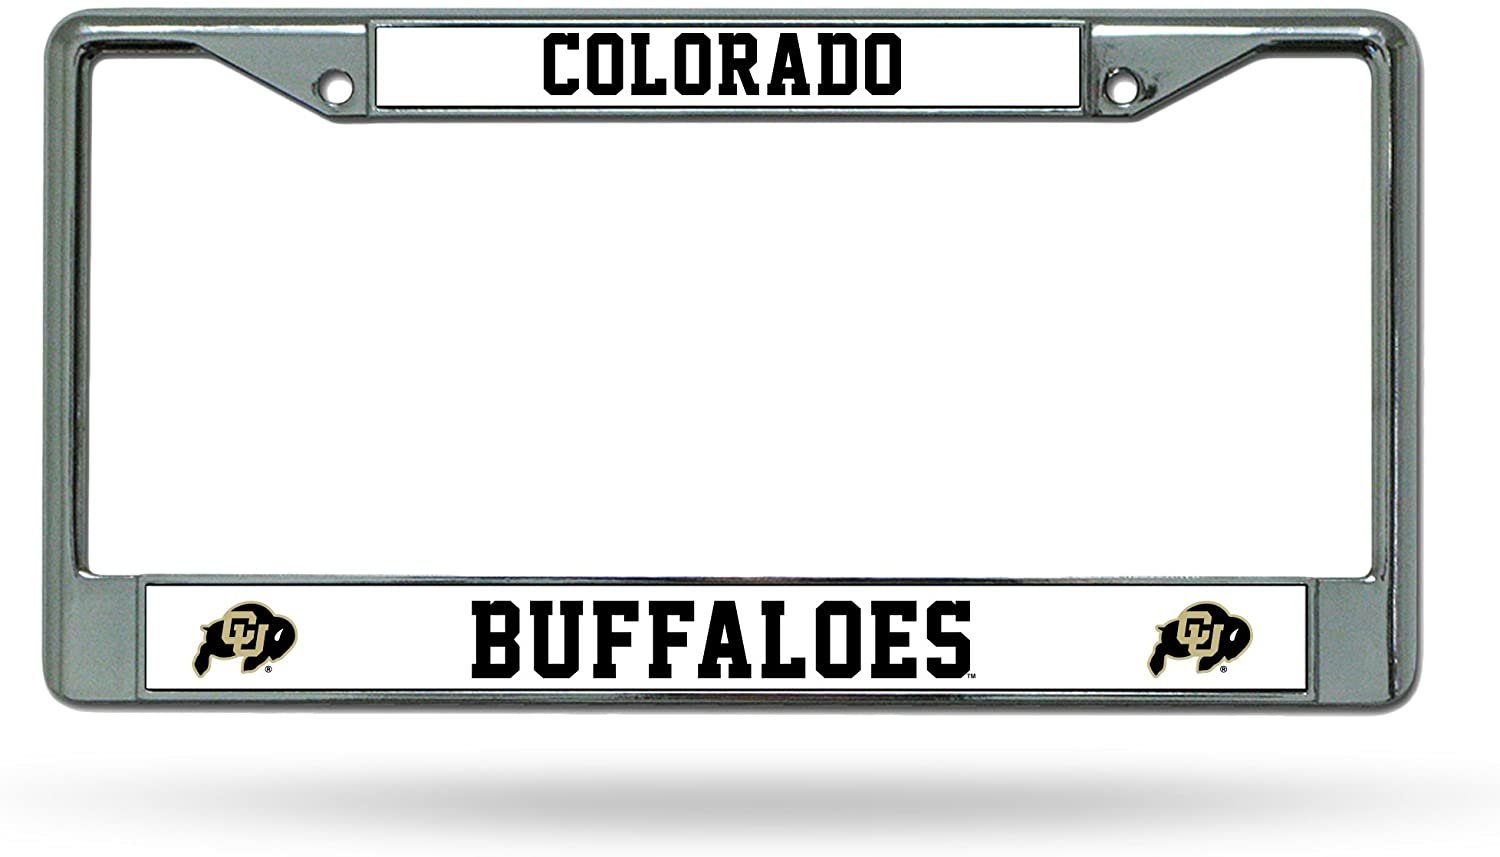 University of Colorado Buffaloes Metal License Plate Frame Chrome Tag Cover, 12x6 Inch